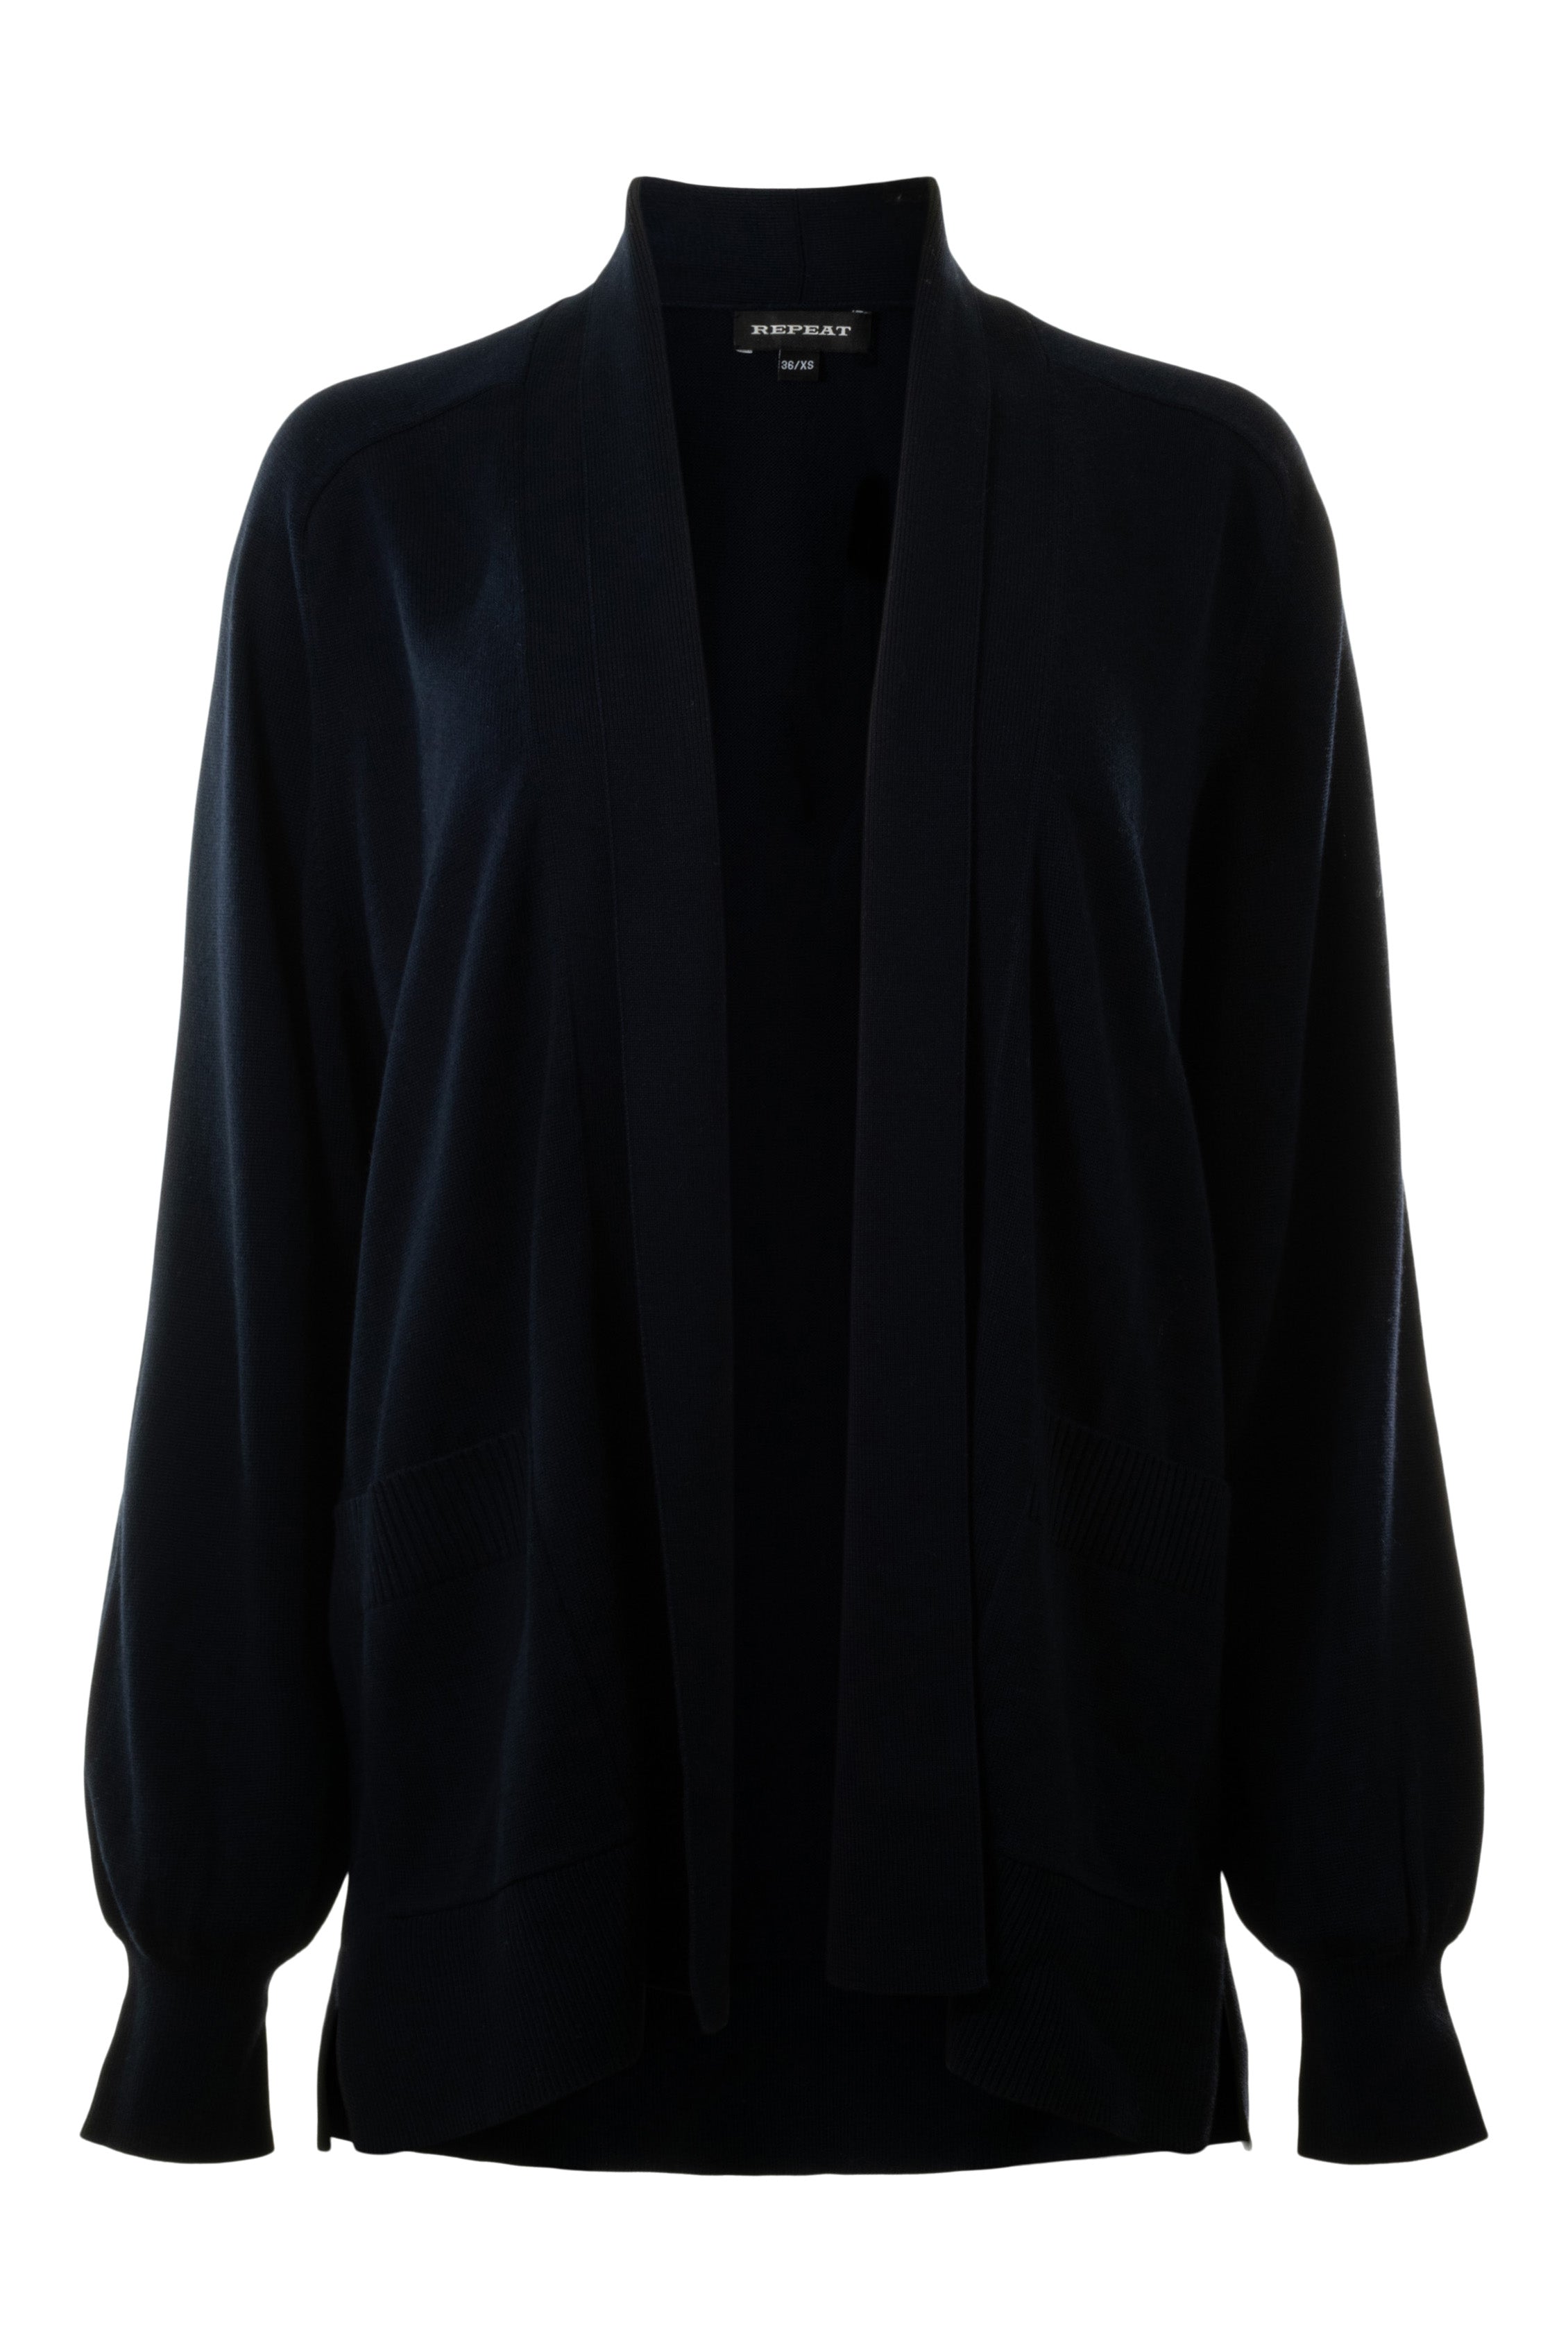 Repeat Cashmere Fine Knit Cotton Blend Cardigan with Pockets